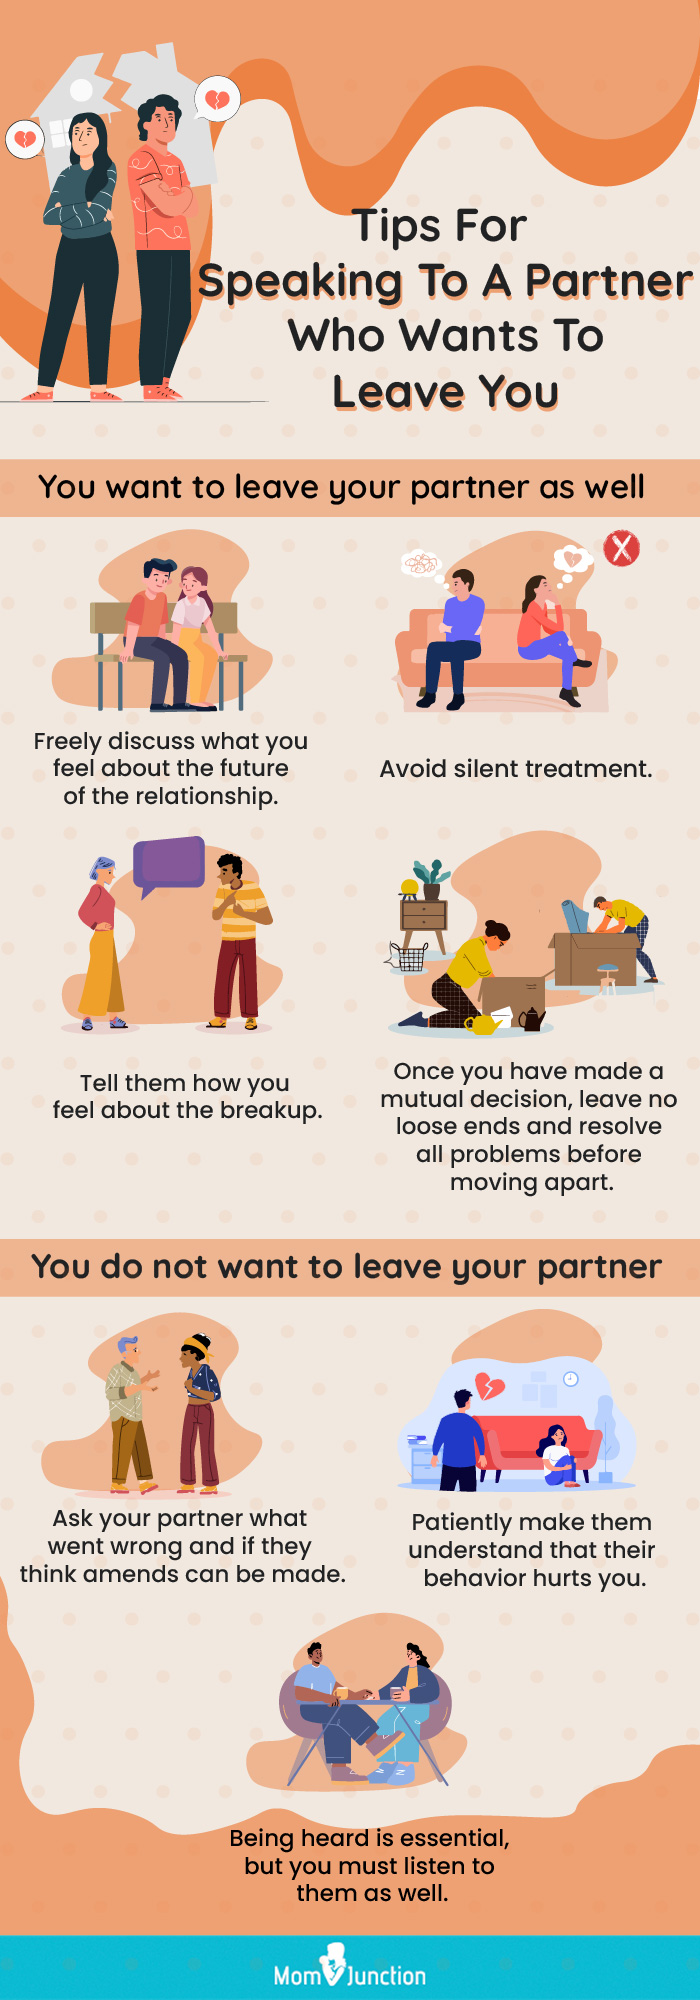 tips For speaking to a partner who wants to leave you [infographic]